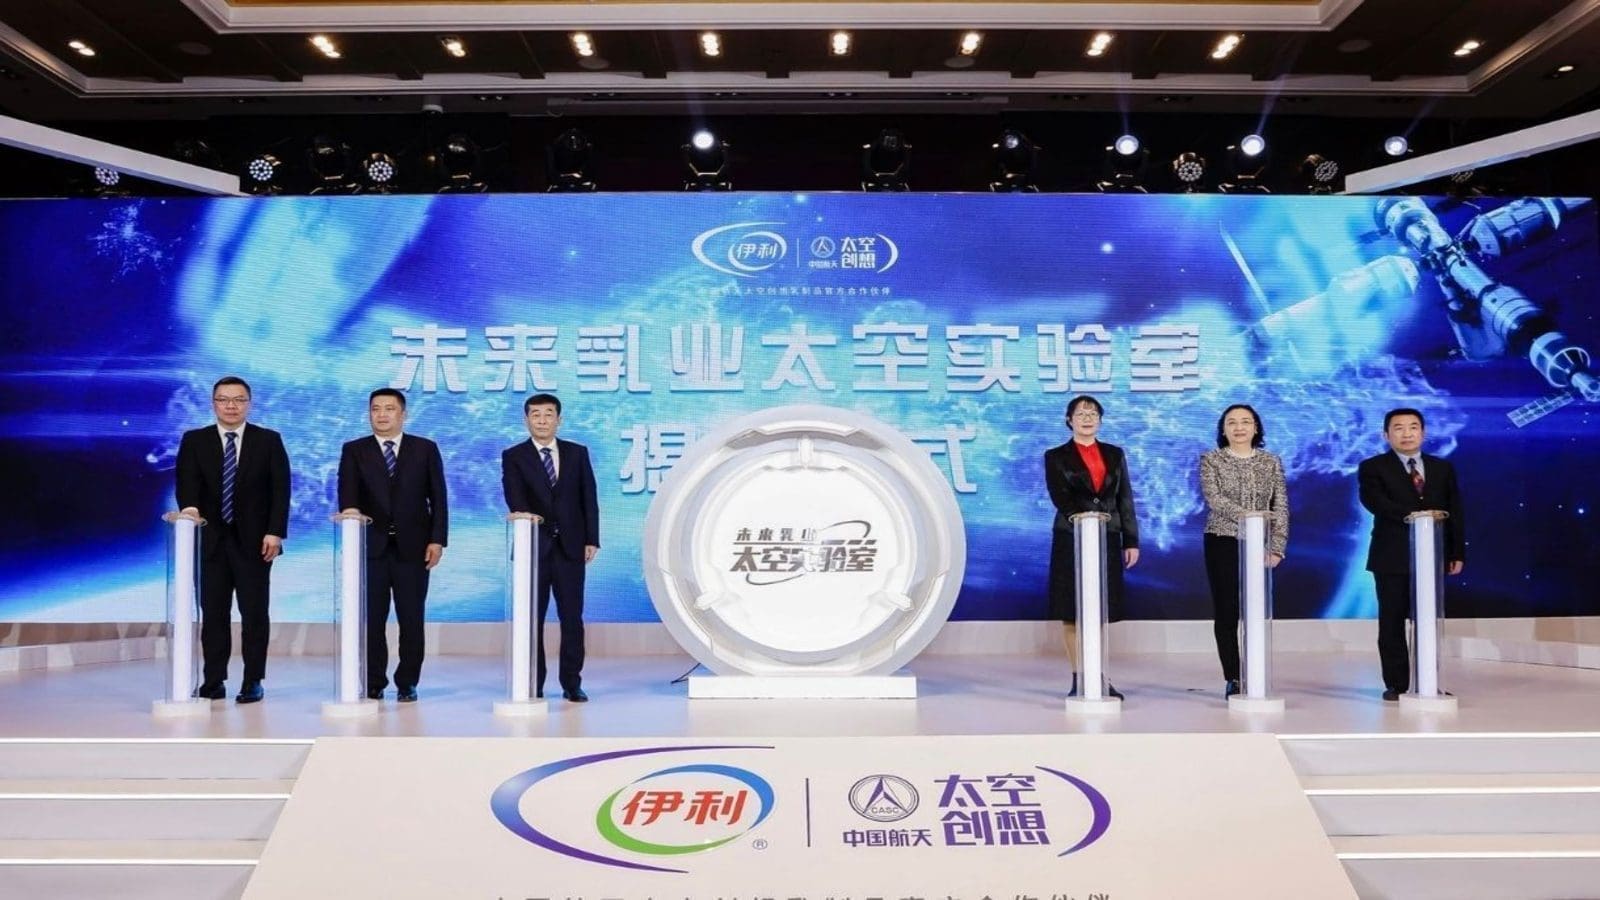 Yili unveils new partnership to “upgrade” the dairy industry through space technology 